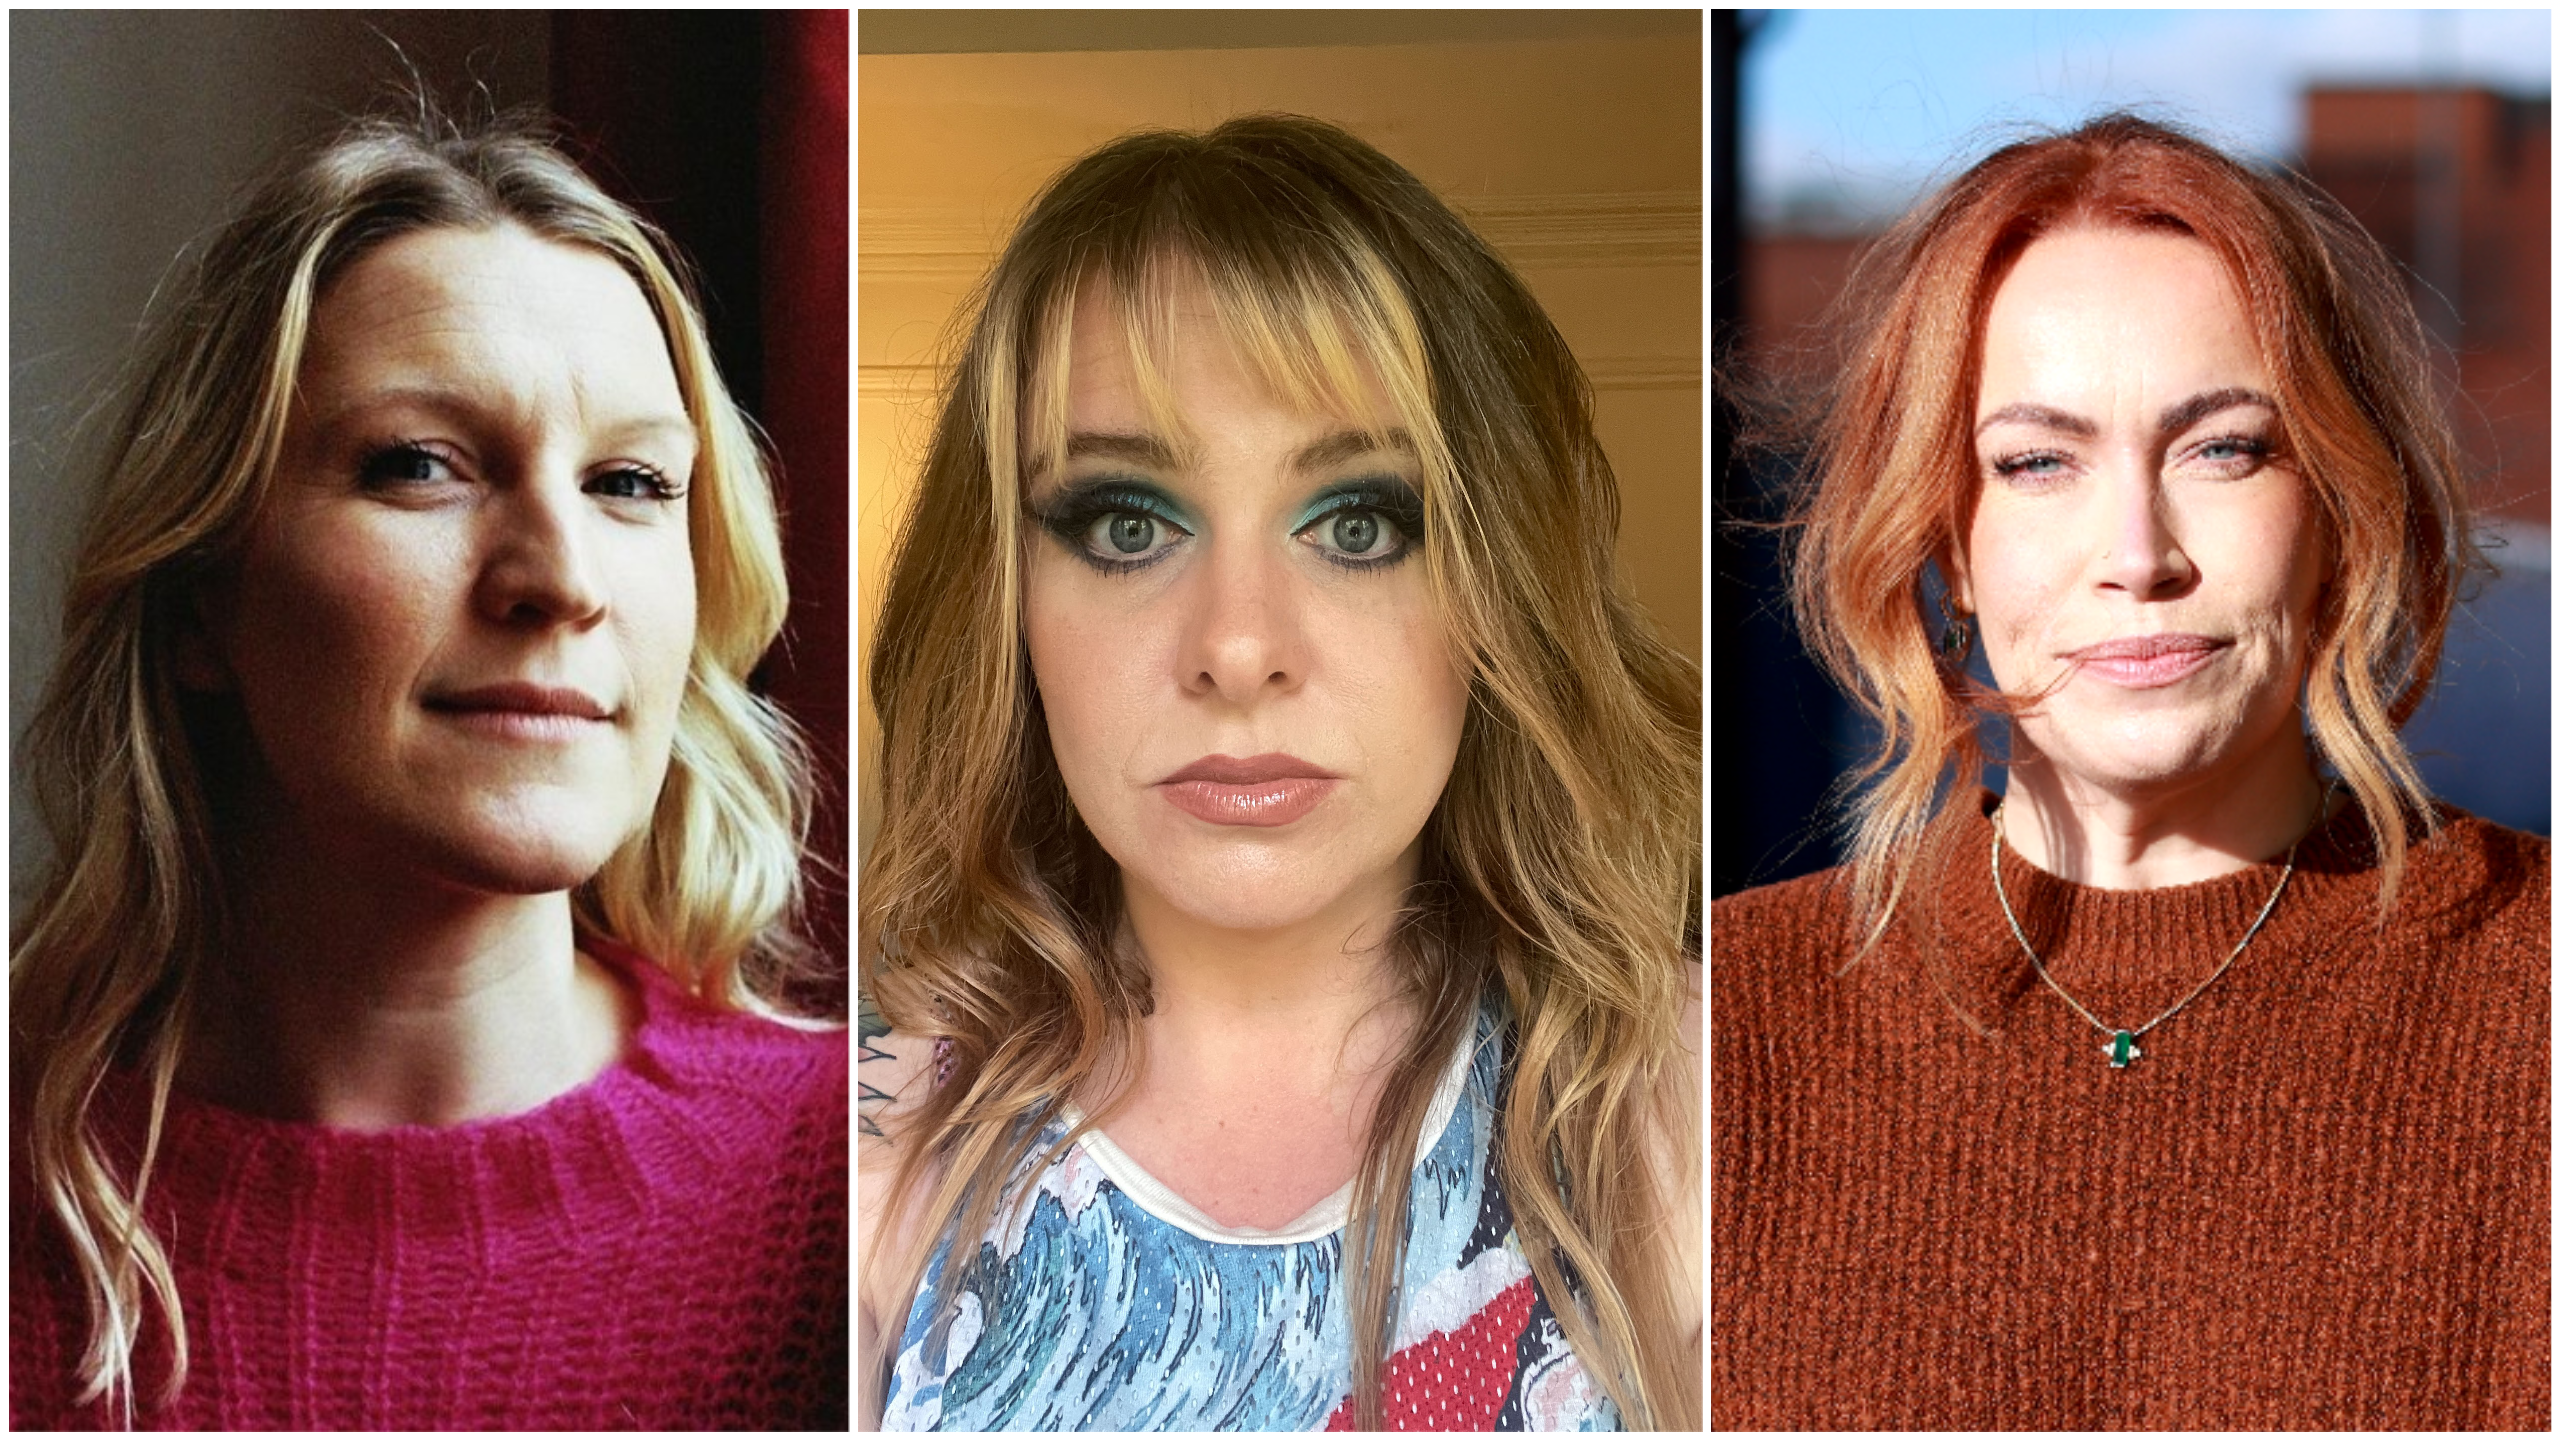 Three headshots. On the left, is an image of a white woman with blonde hair, wearing a pink jumper. Centre, is an image of a white woman with blonde/brown hair, wearing a blue top. On the right, is an image of a white woman with ginger hair wearing an orangey brown jumper.